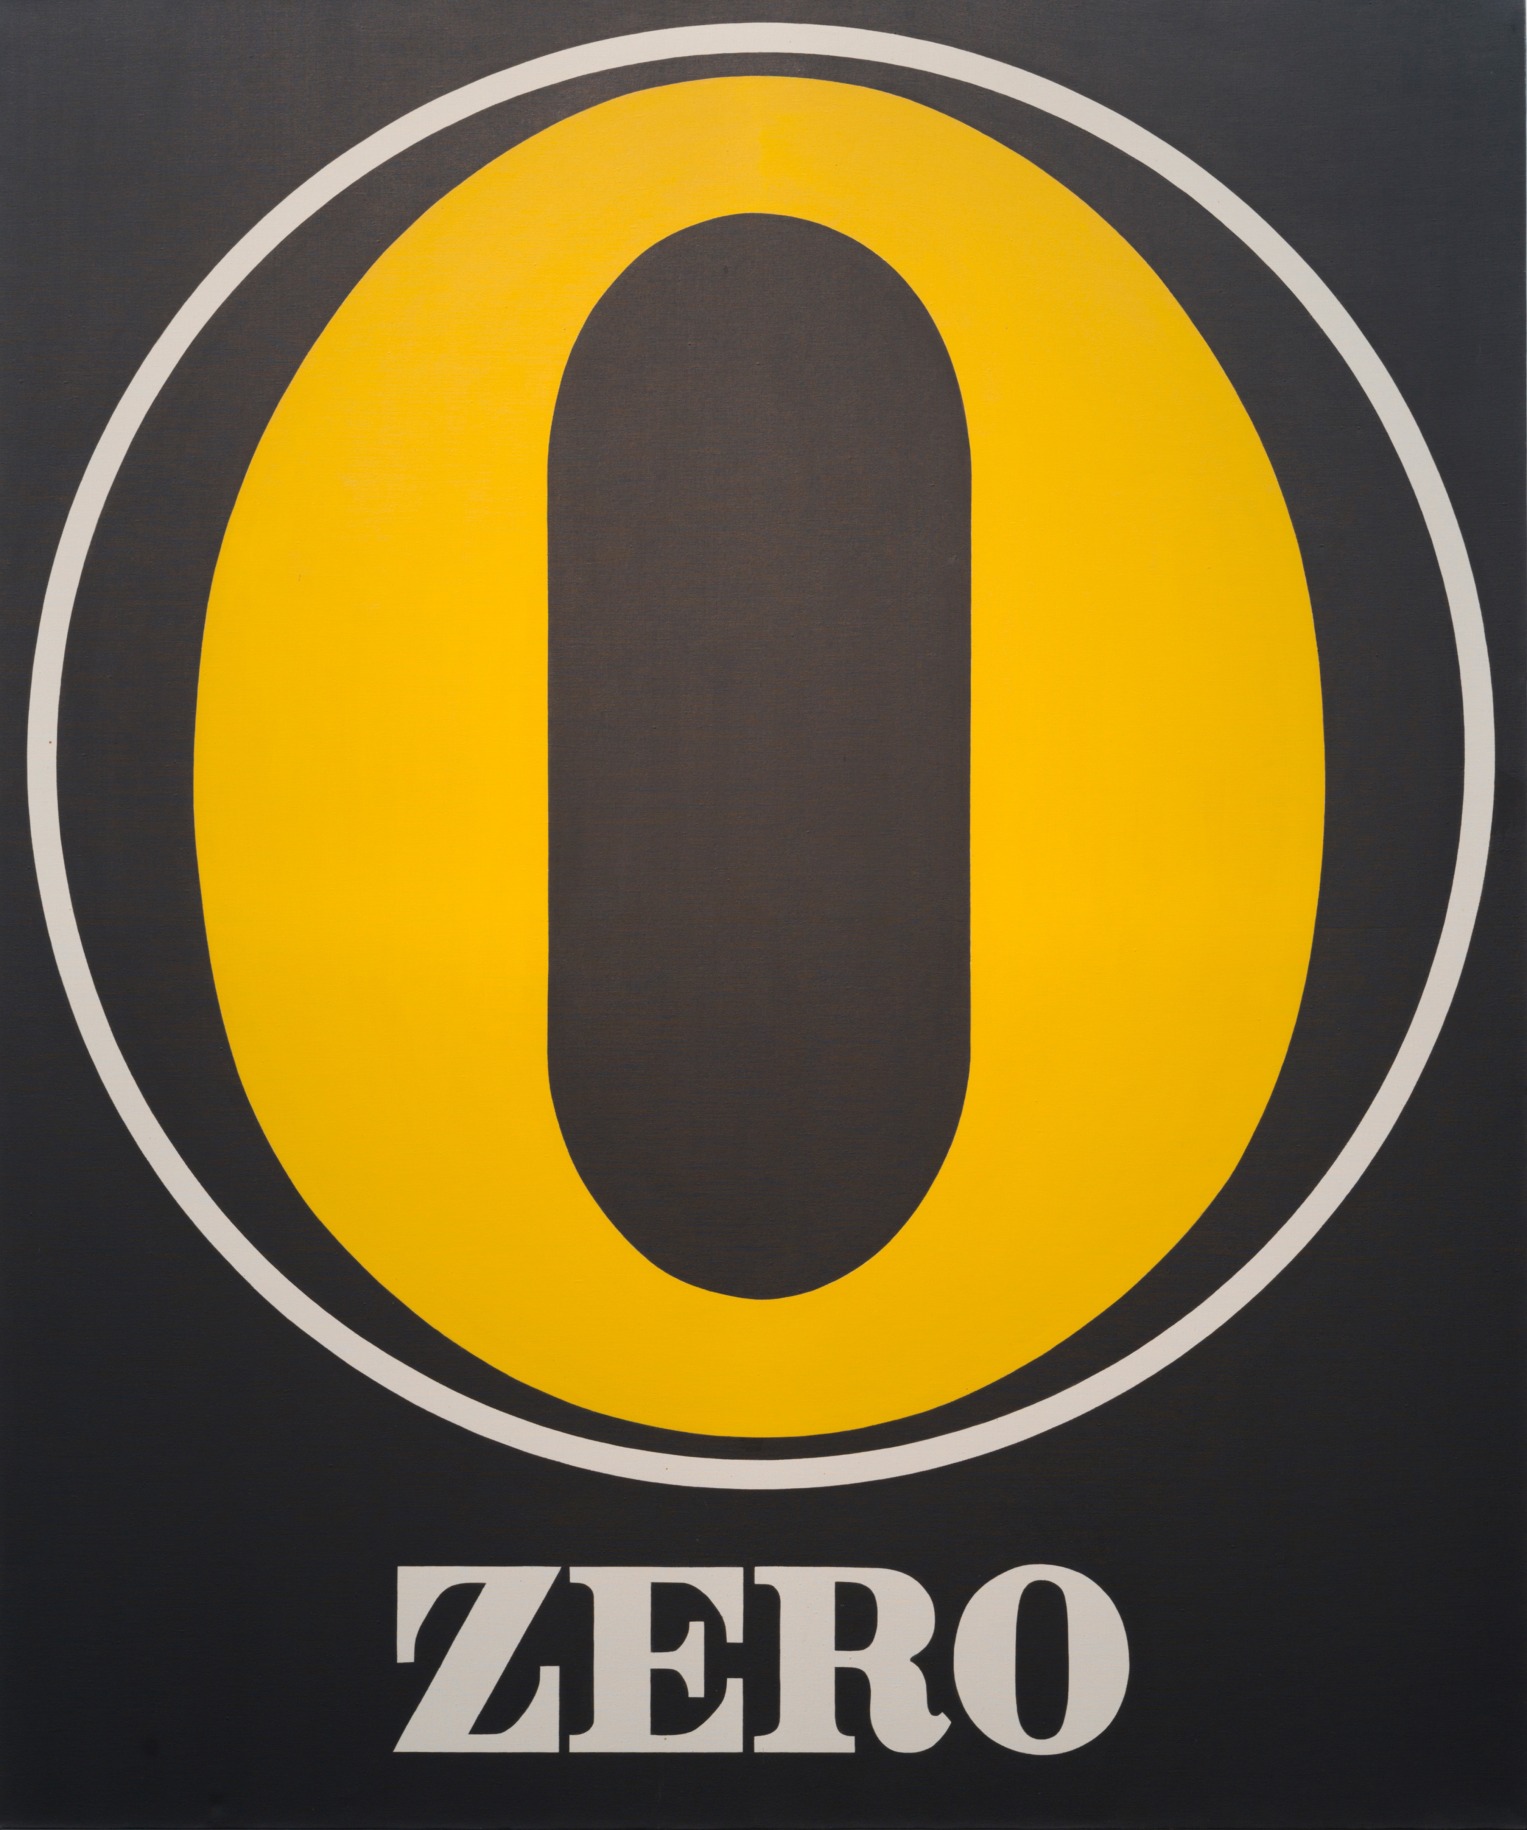 Golden Zero, a 60 by 50 inch black canvas with ZERO painted in white letters at the bottom. Dominating the canvas is a golden yellow numeral zero within a black circle with a white outline.